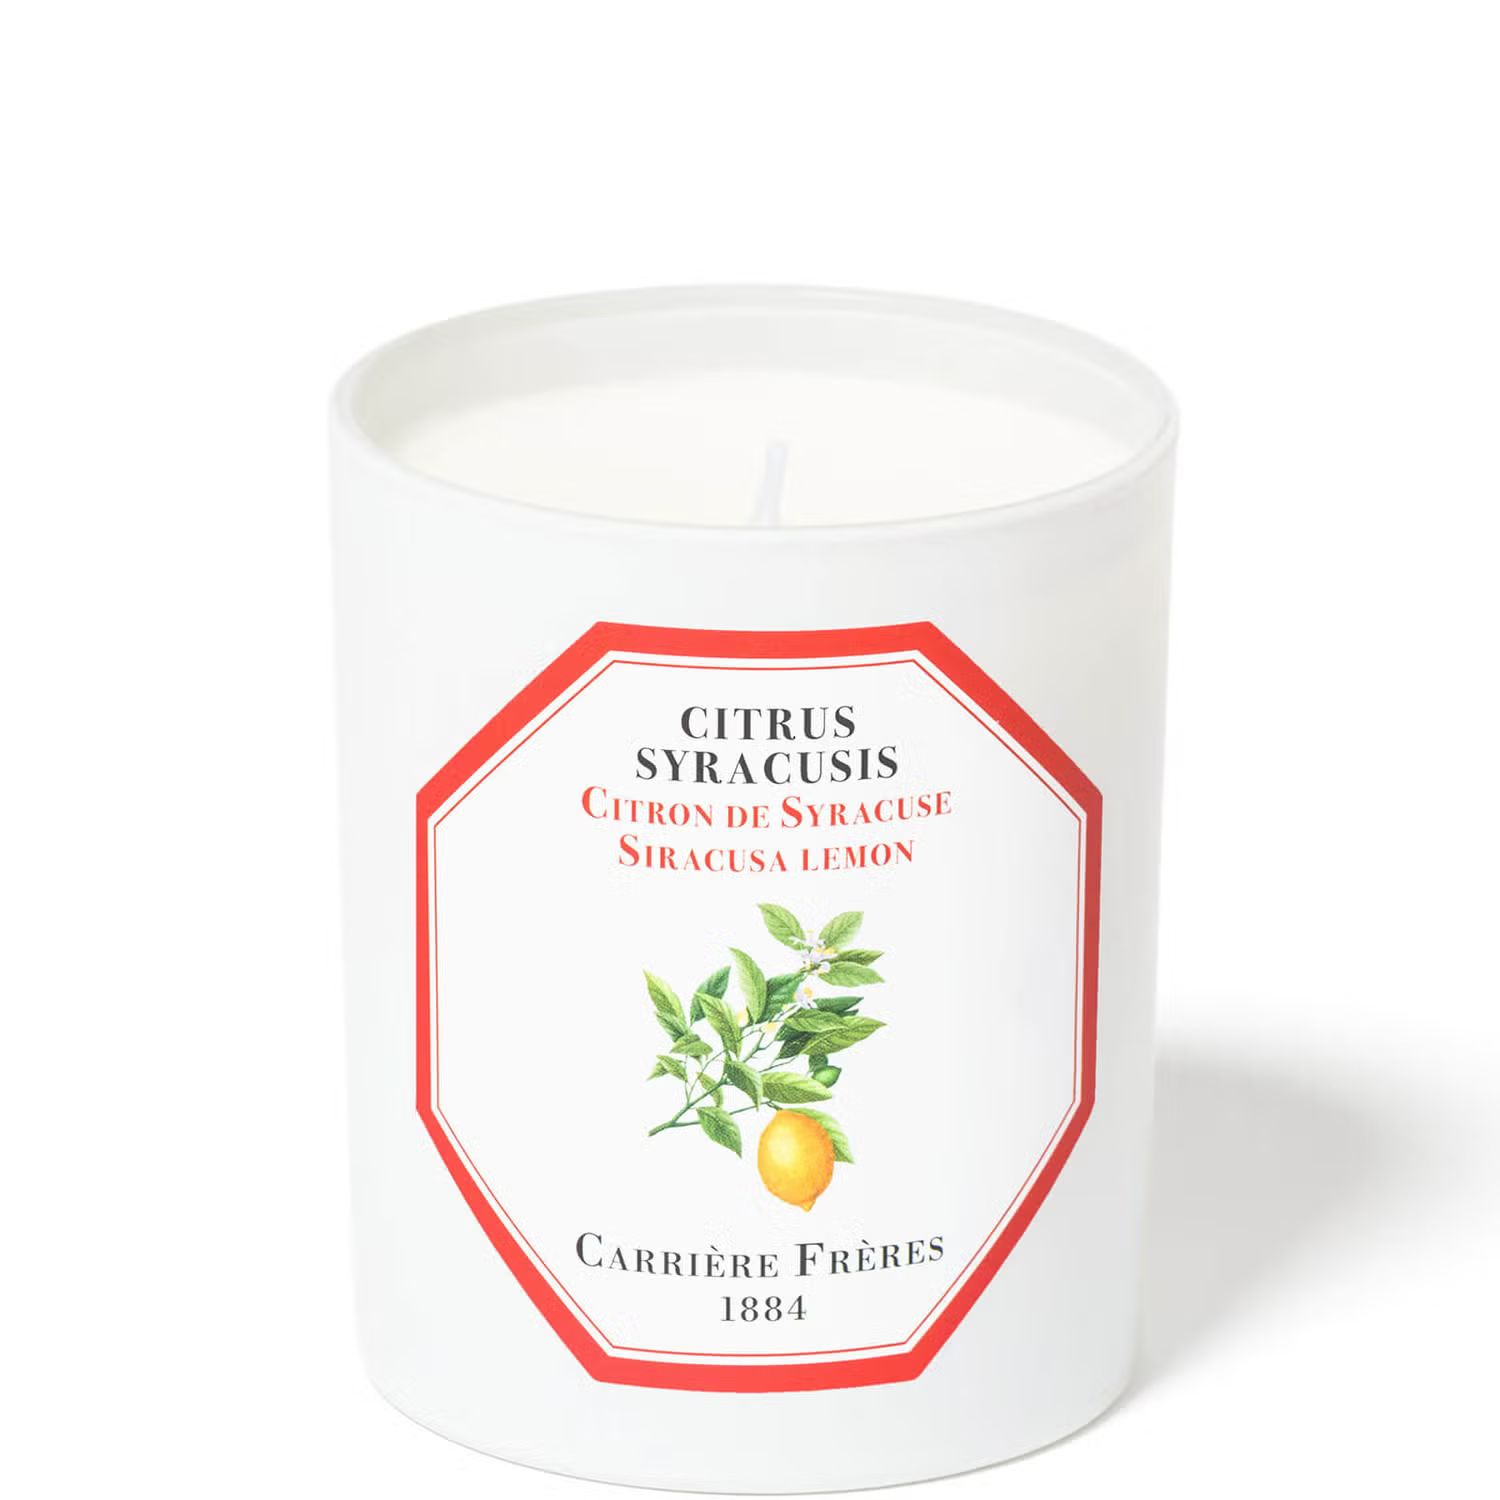 Carrière Frères Scented Candle Siracusa Lemon - Citrus Syracusis - 185 g | Dermstore (US)